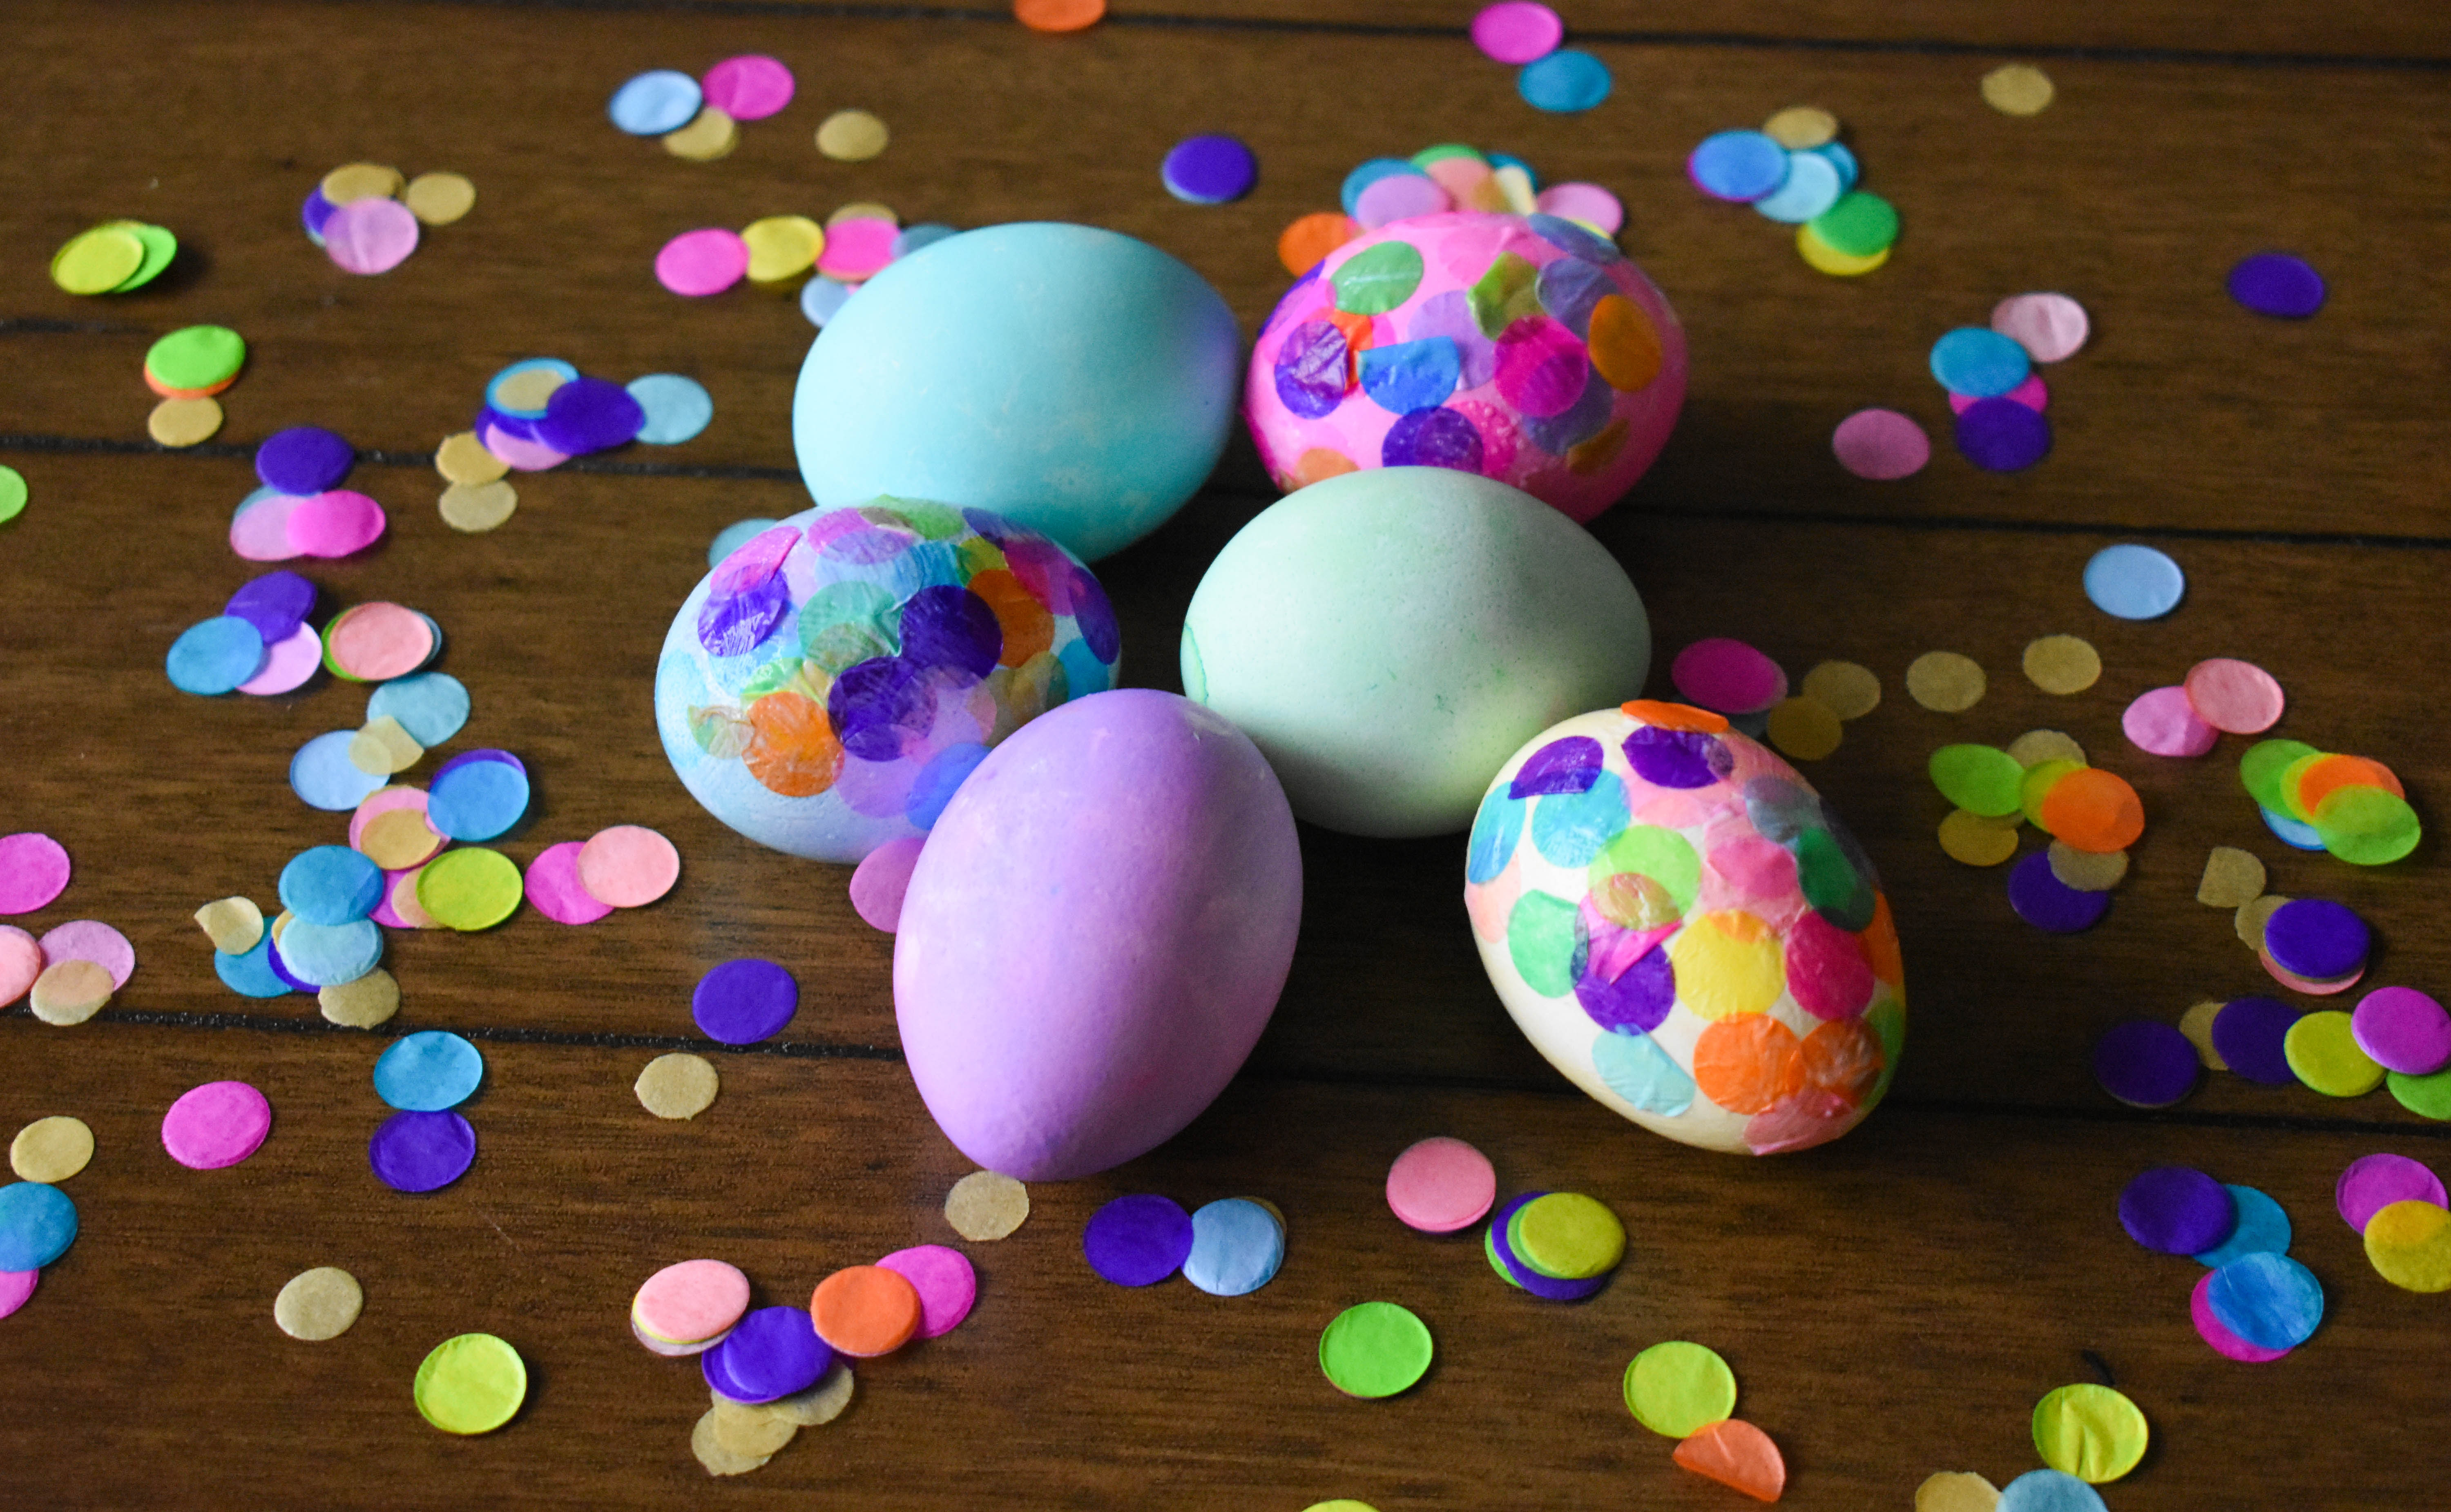 rainbow confetti dyed Easter eggs made by Allison Carter Celebrates